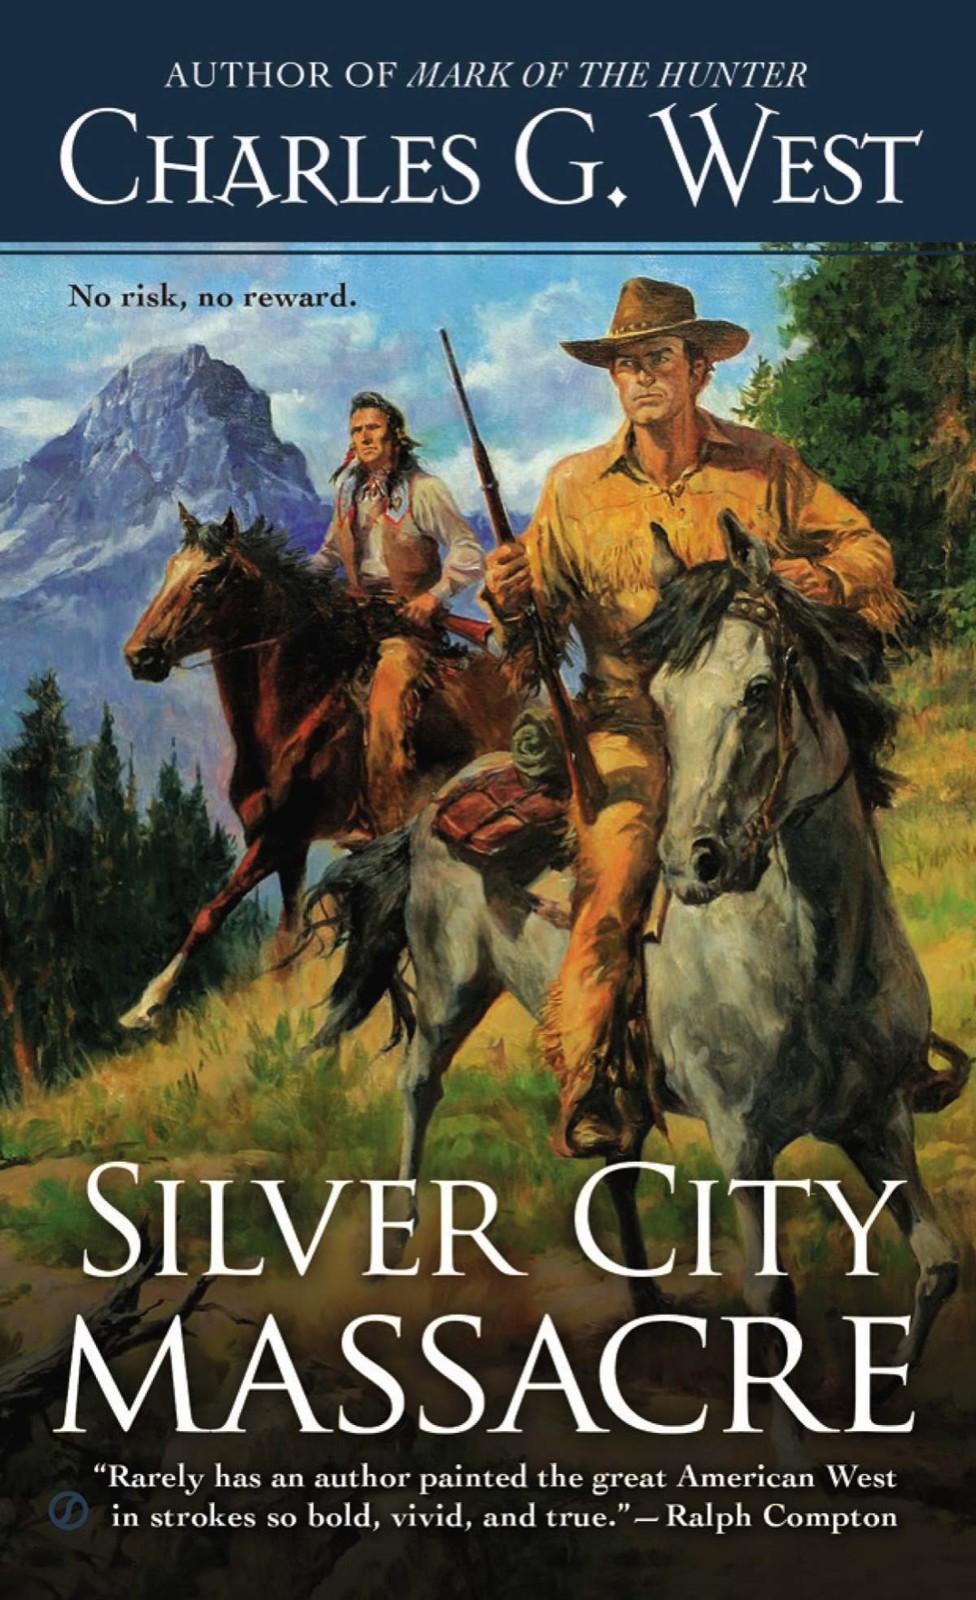 Silver City Massacre by Charles G. West